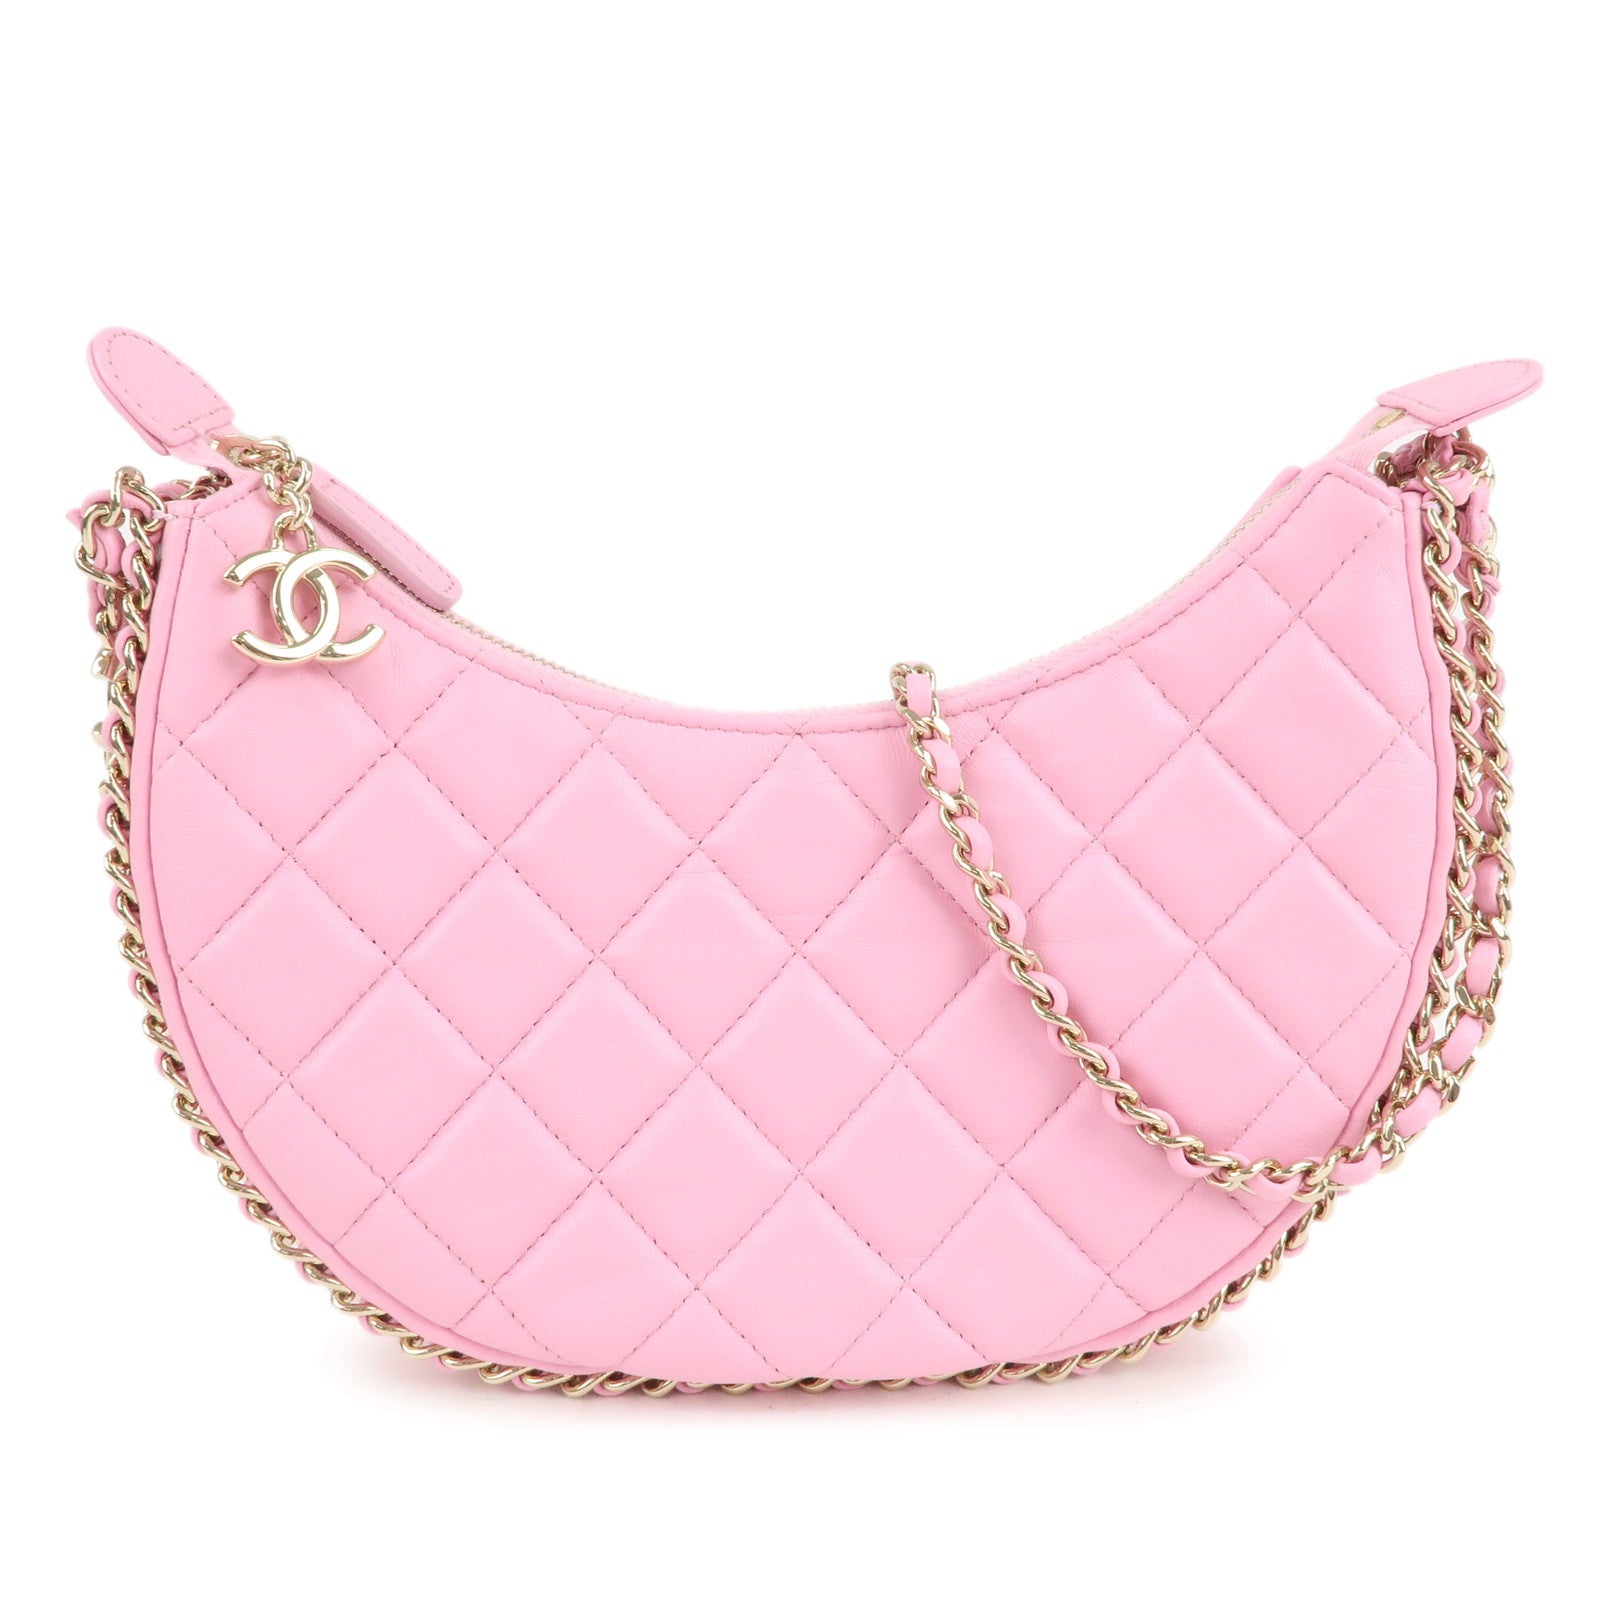 Auth-CHANEL-Matelasse-Lamb-Skin-Small-Hobo-Shoulder-Bag-Pink-AS3917-Used-F/S